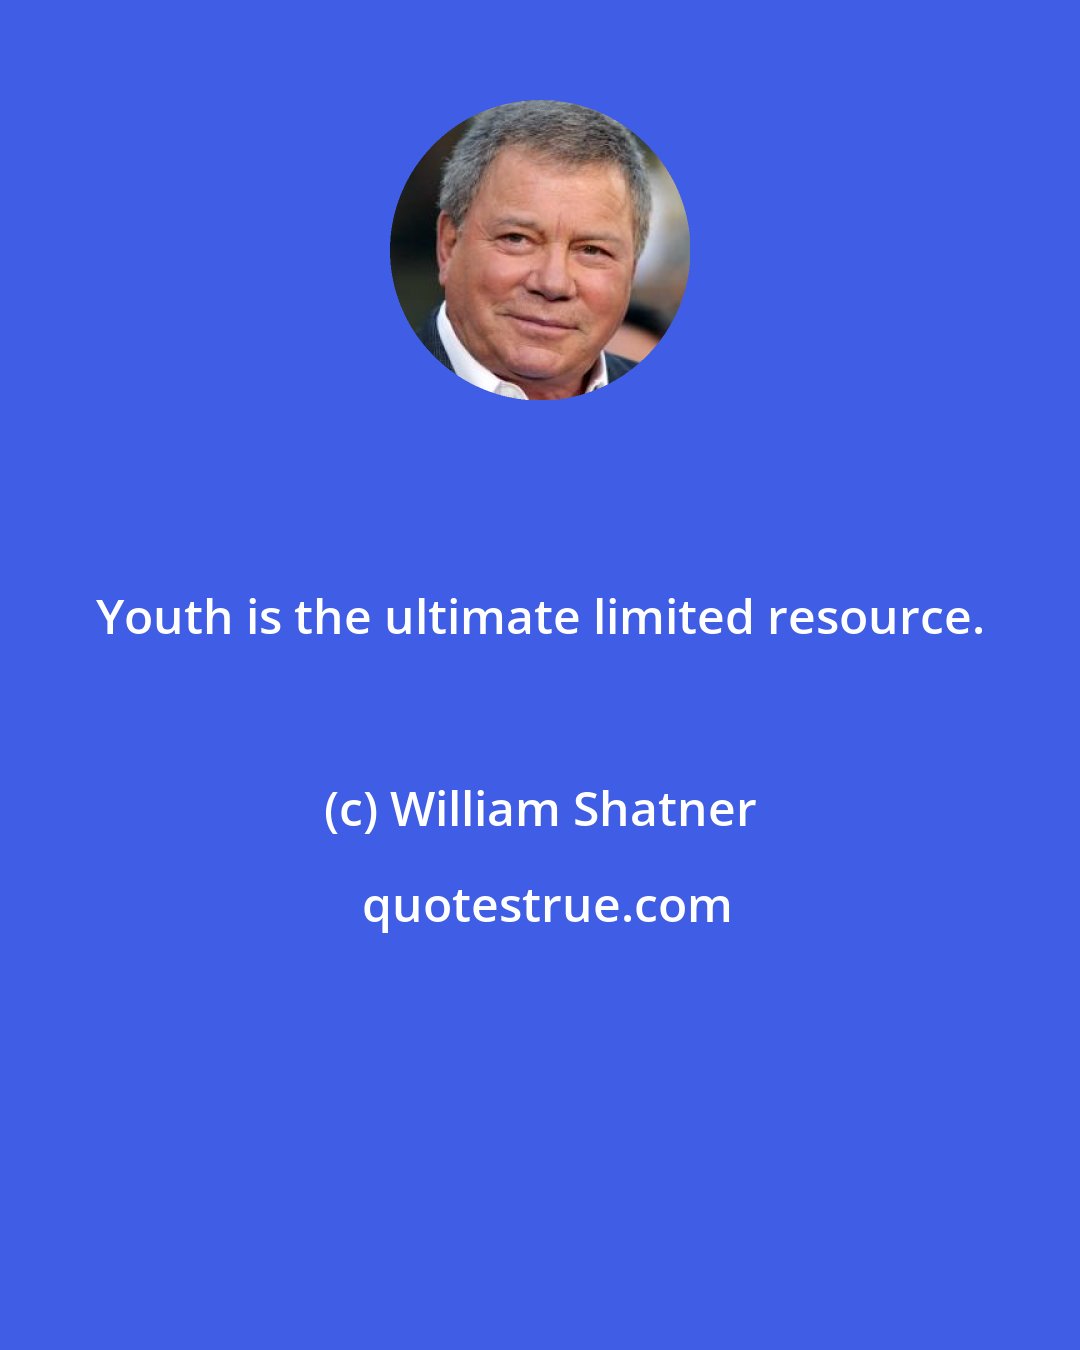 William Shatner: Youth is the ultimate limited resource.